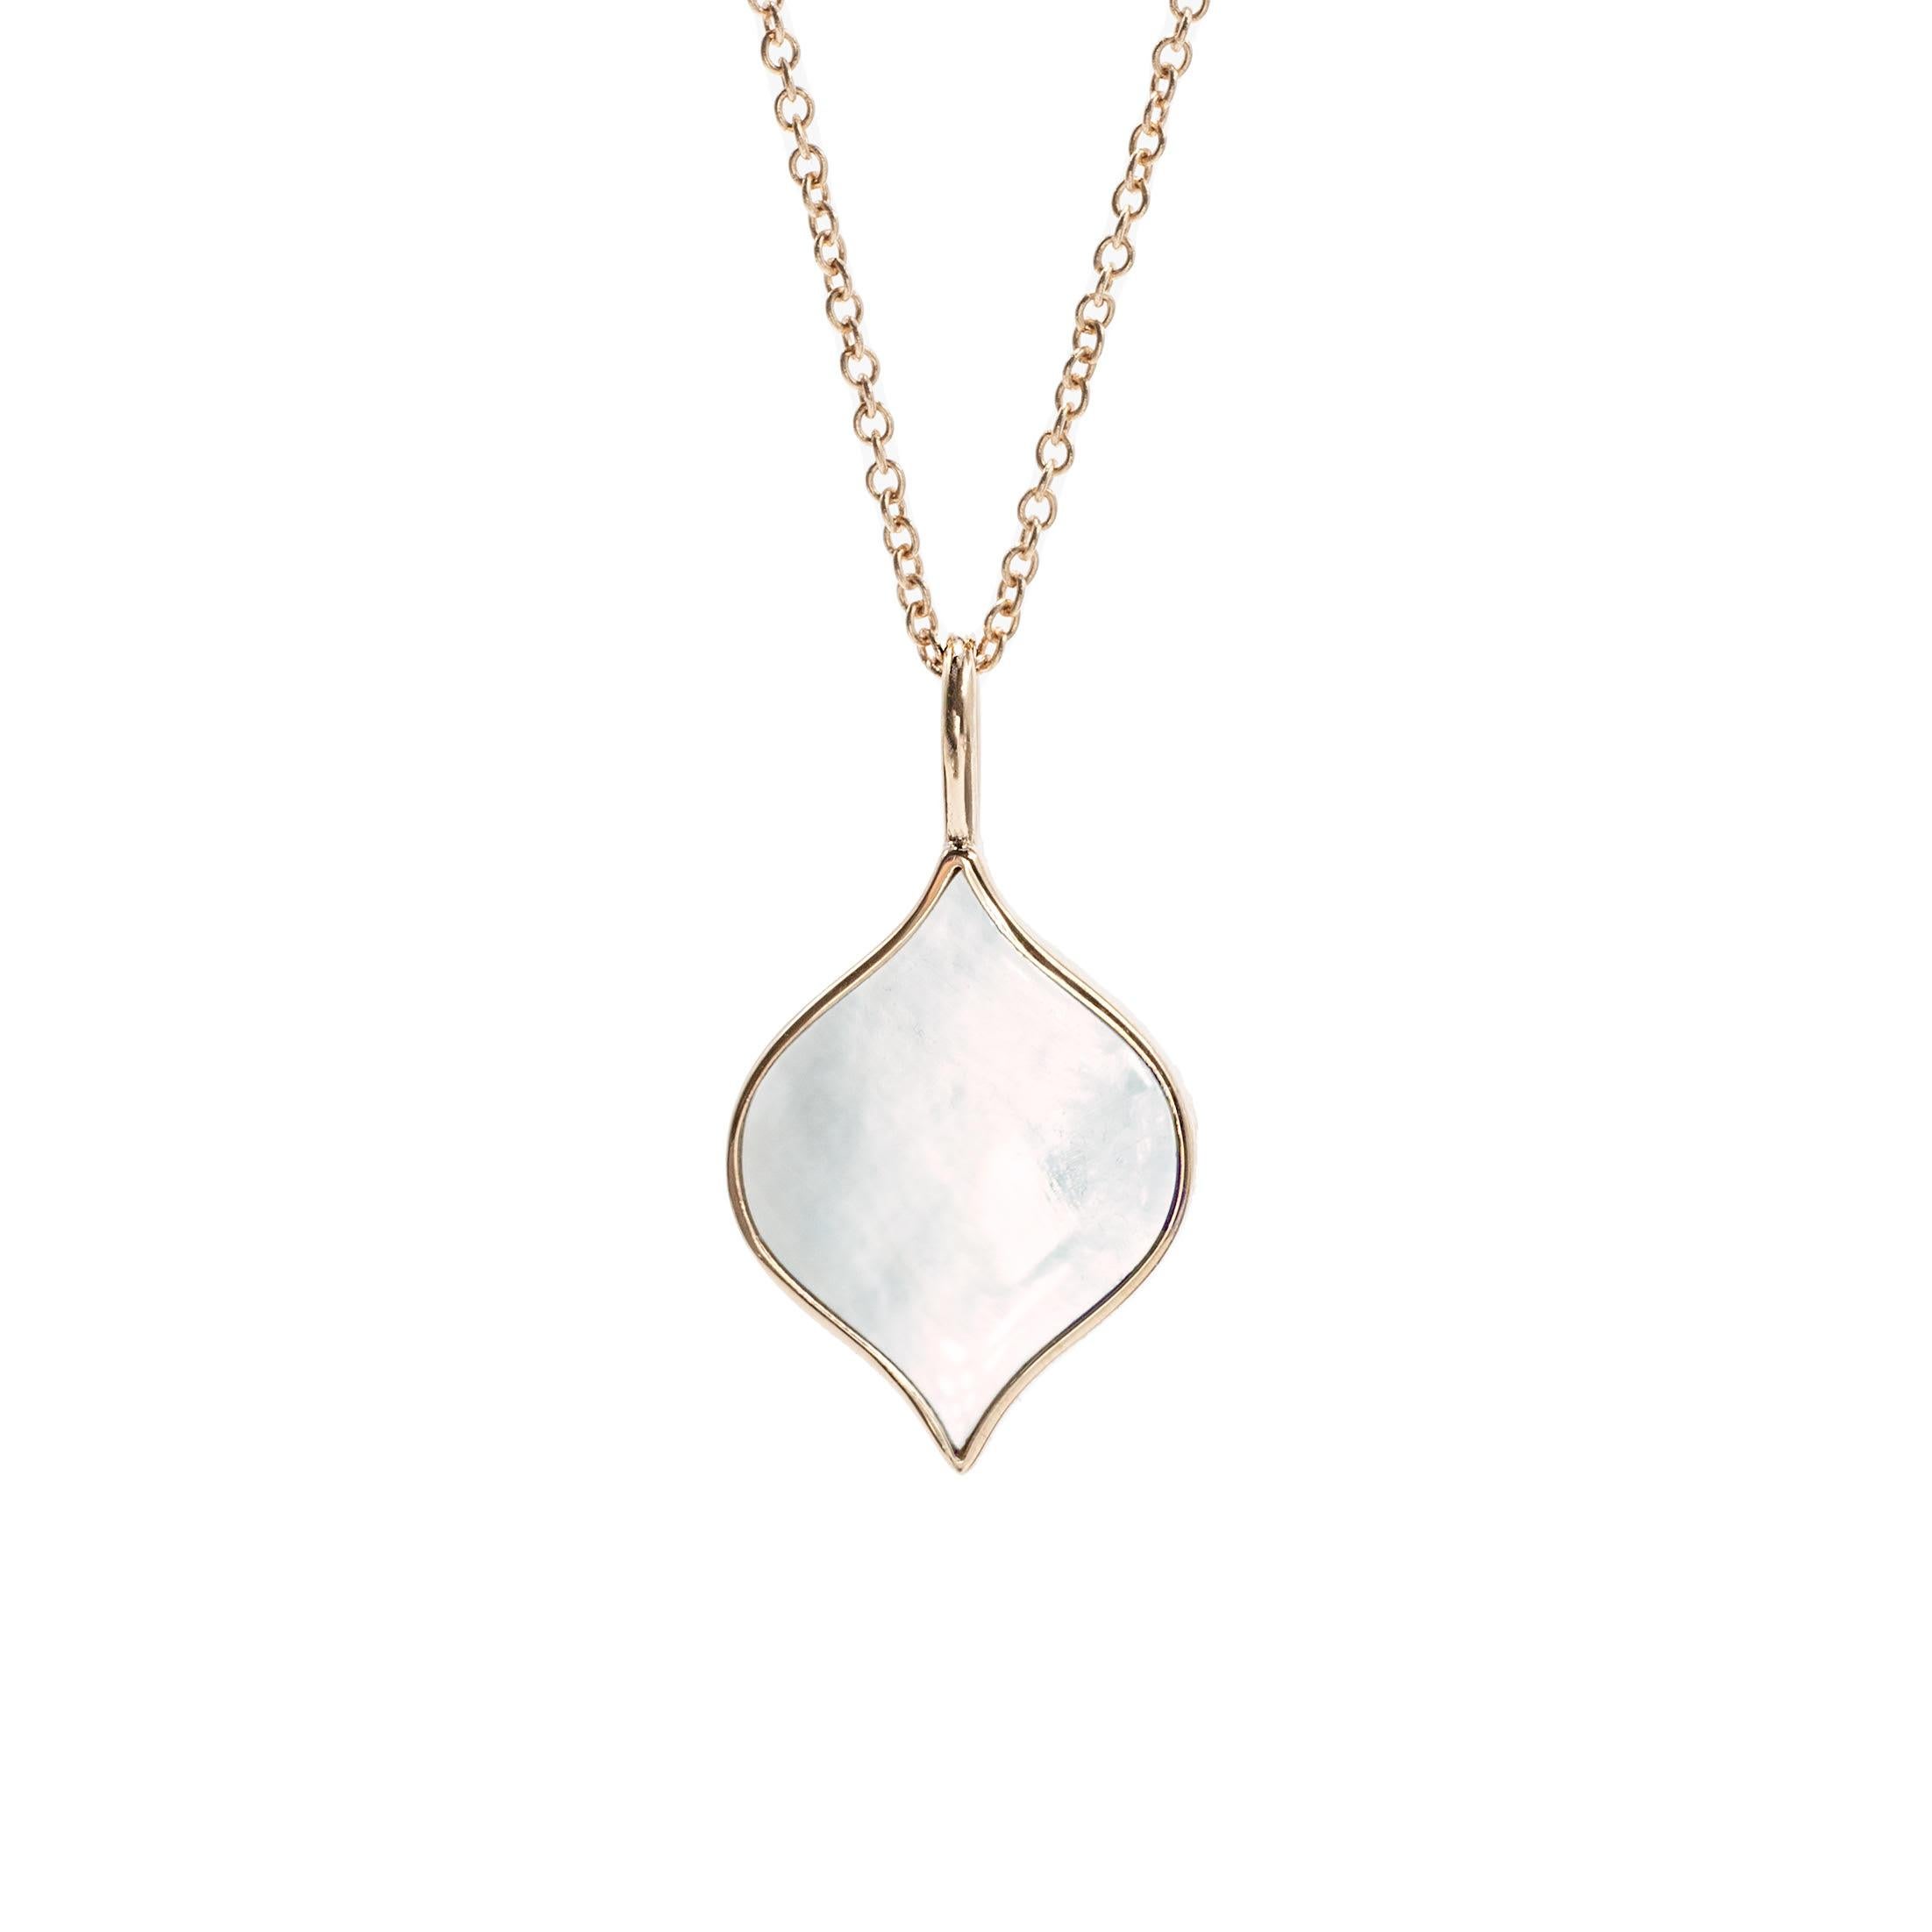 The Roseate Unity Pendant.  Roseate unity symbolizes the combination of water drops in an iconic emblem of optimism.

- 18k Rose Gold
- White Mother-of-Pearl, 16mm
- Mother-of-Pearl responsibly farmed in Western Australia
- 16-18 inch adjustable